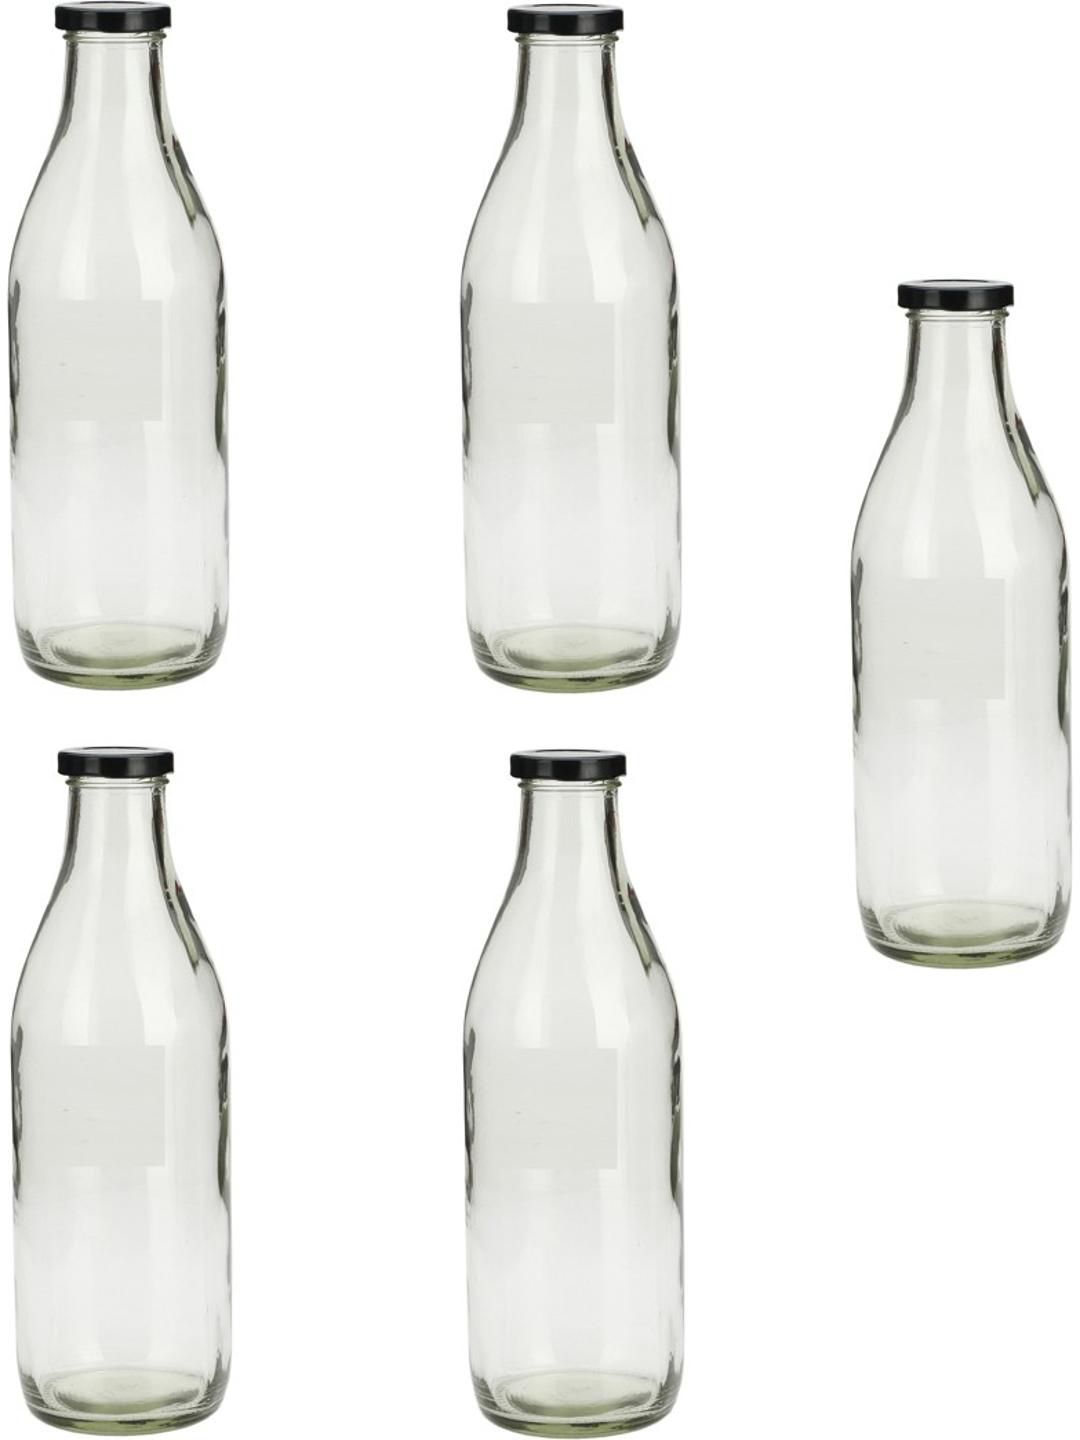     			AFAST Multipurpose Bottle Glass Transparent Utility Container ( Set of 5 )